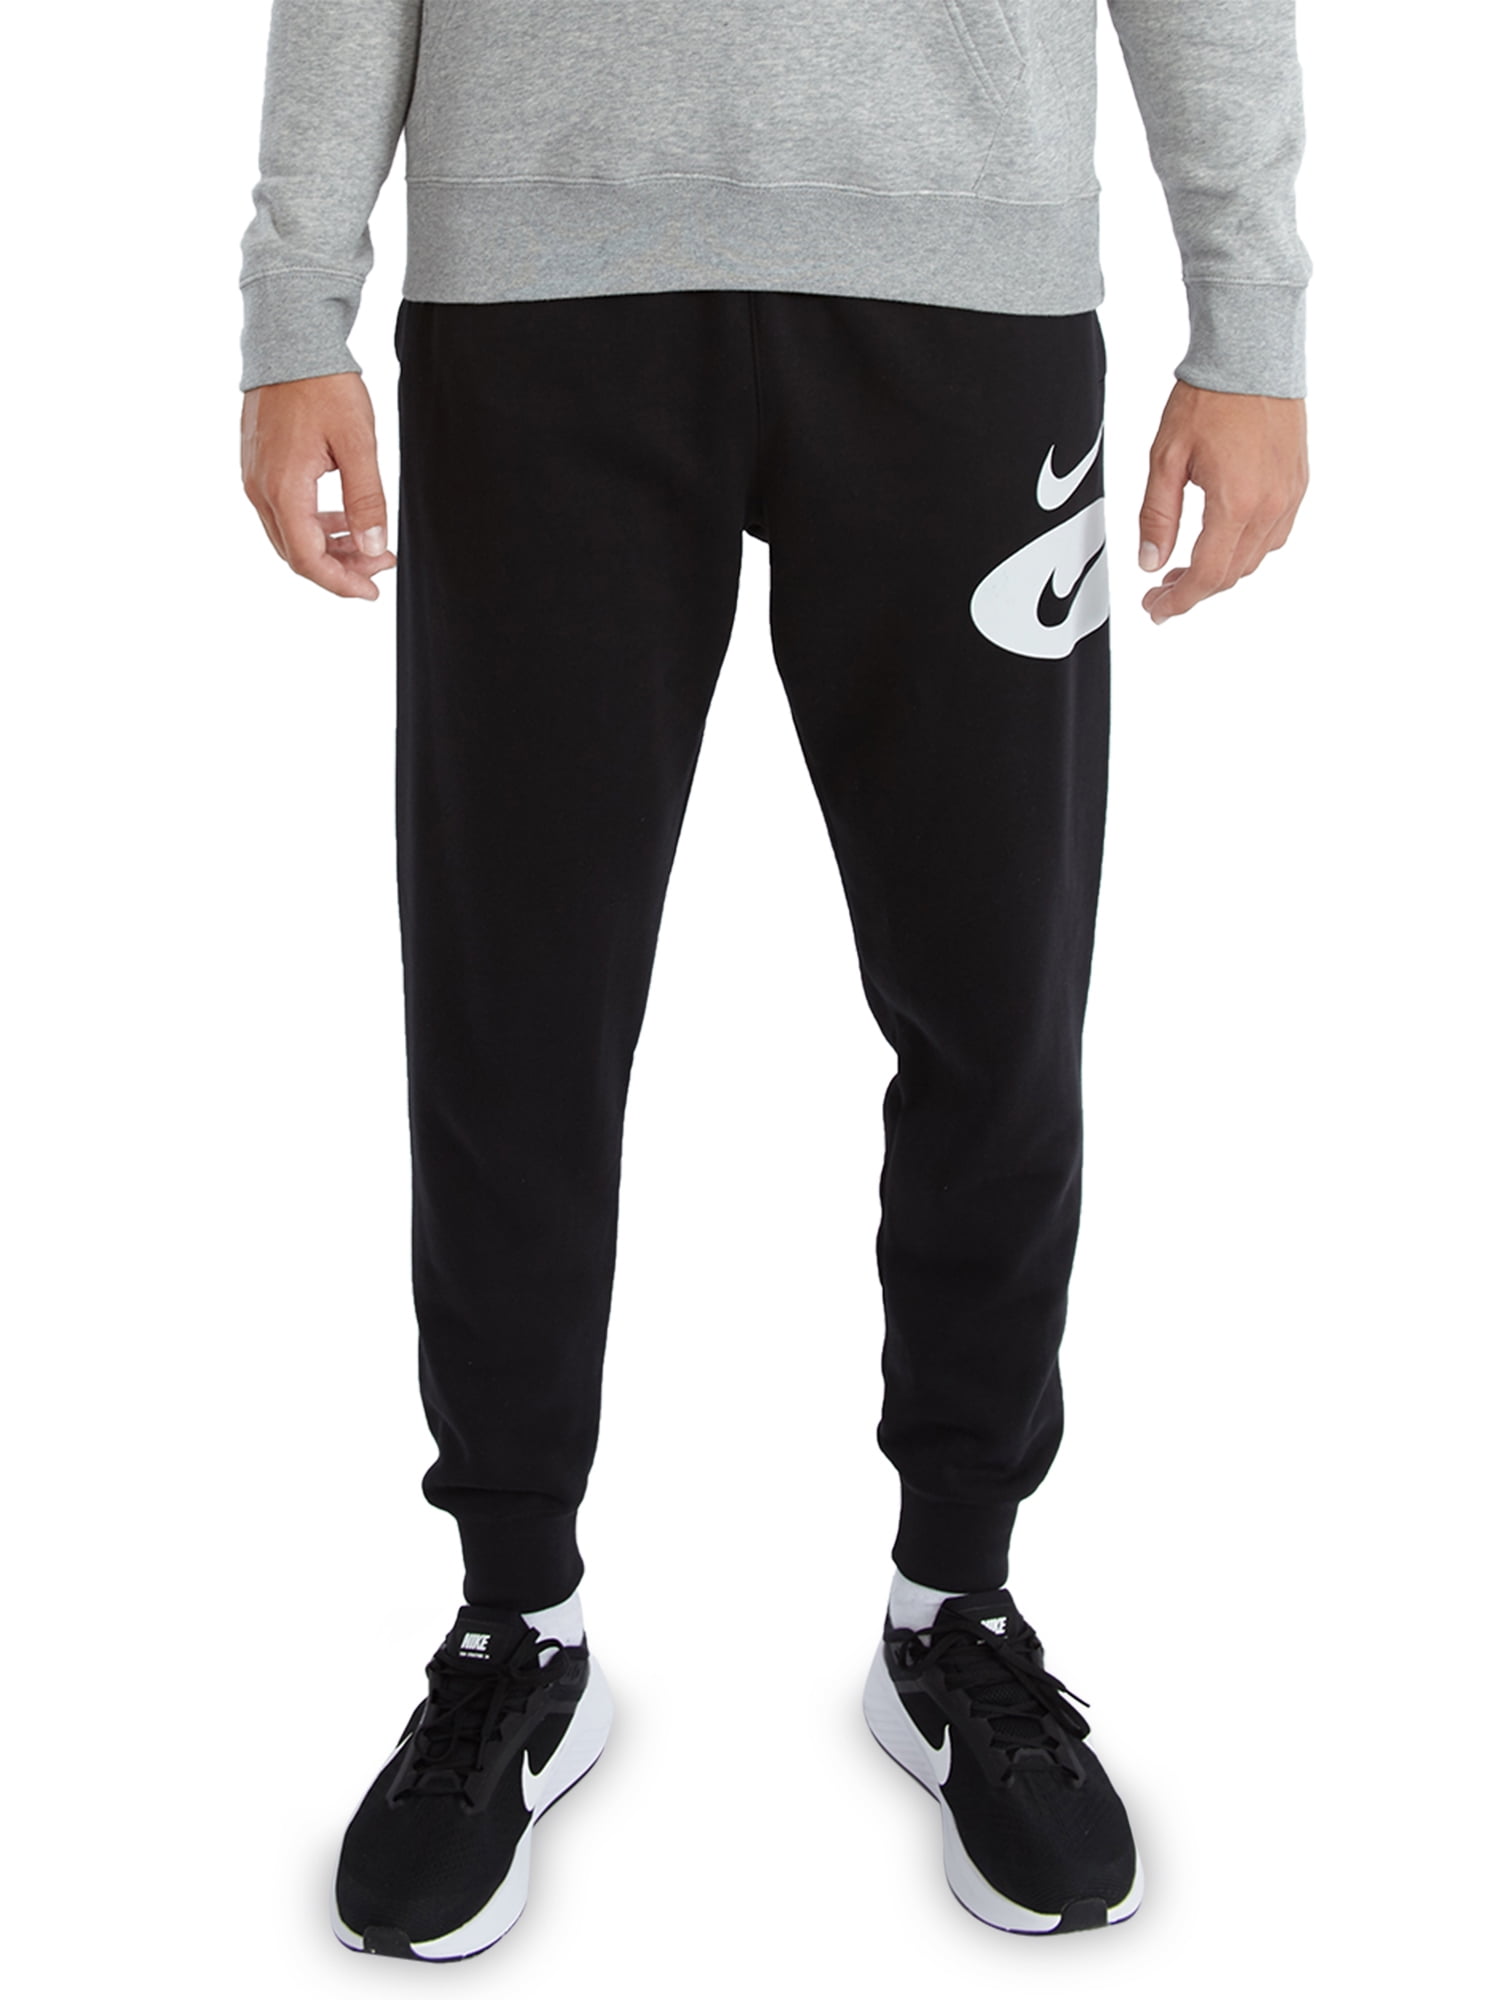 Buy Nike Test Trousers Online India Nike Cricket Pants Online Store